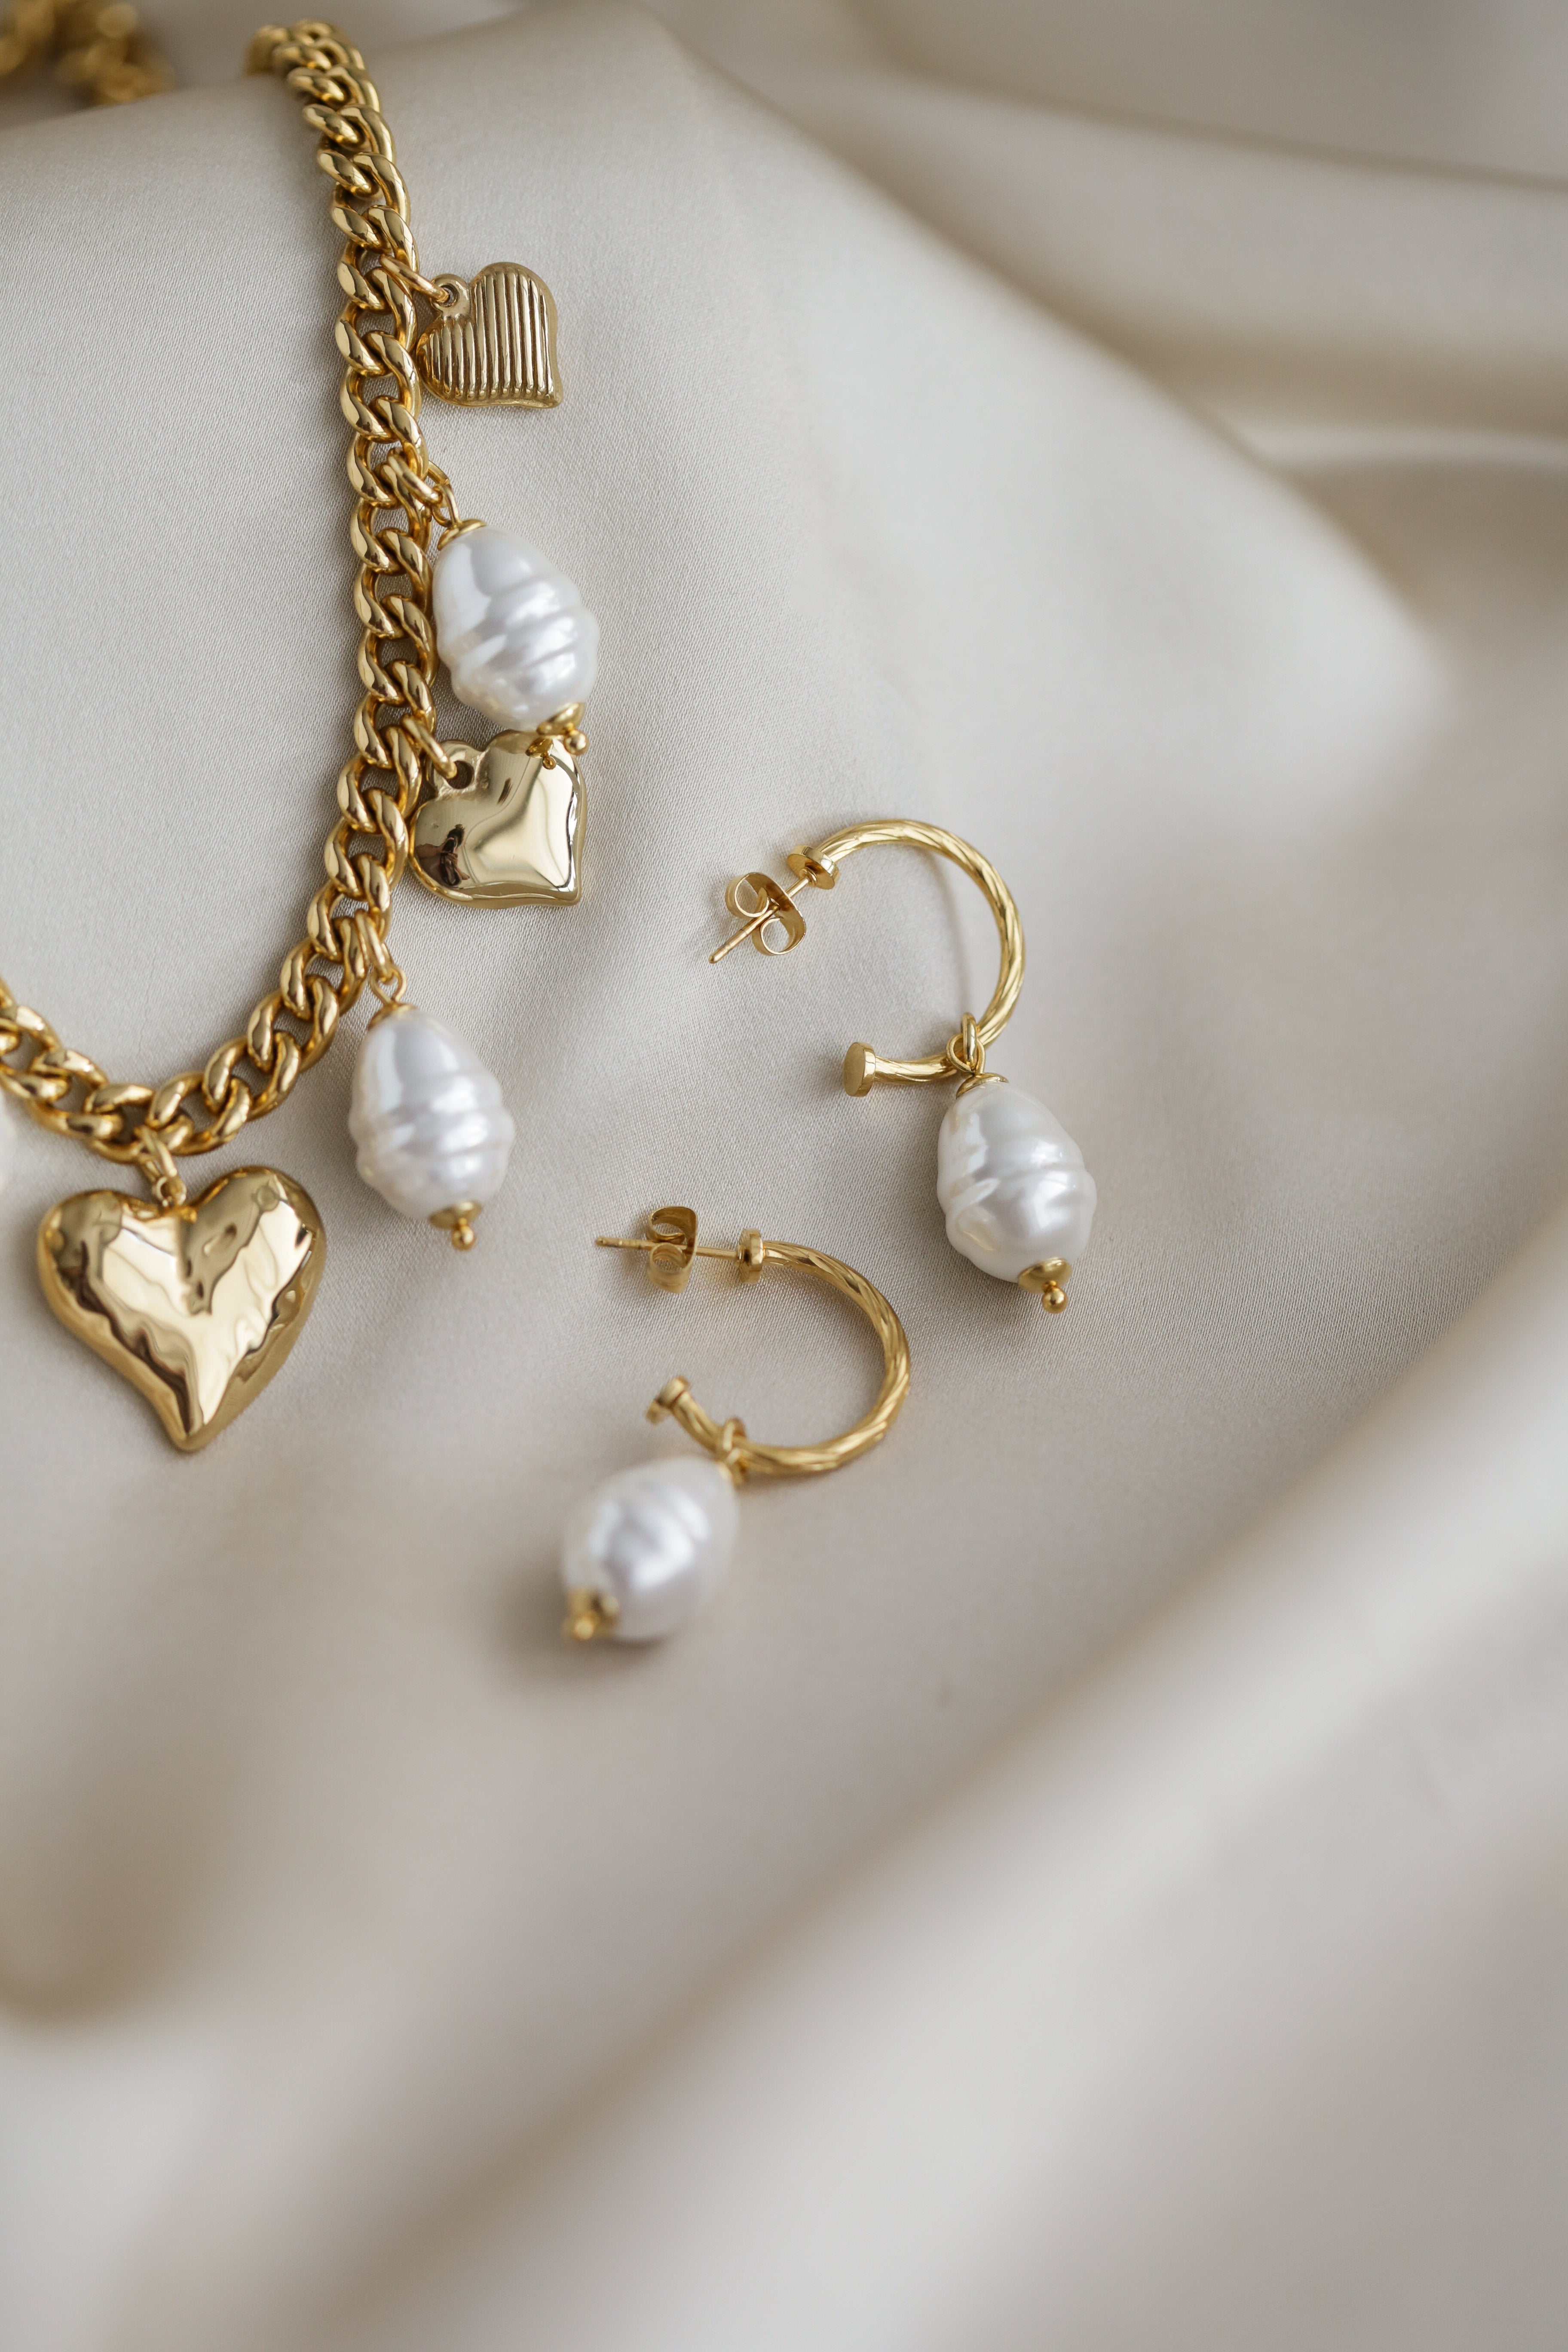 The Heart - Pearl Hoops - Boutique Minimaliste has waterproof, durable, elegant and vintage inspired jewelry